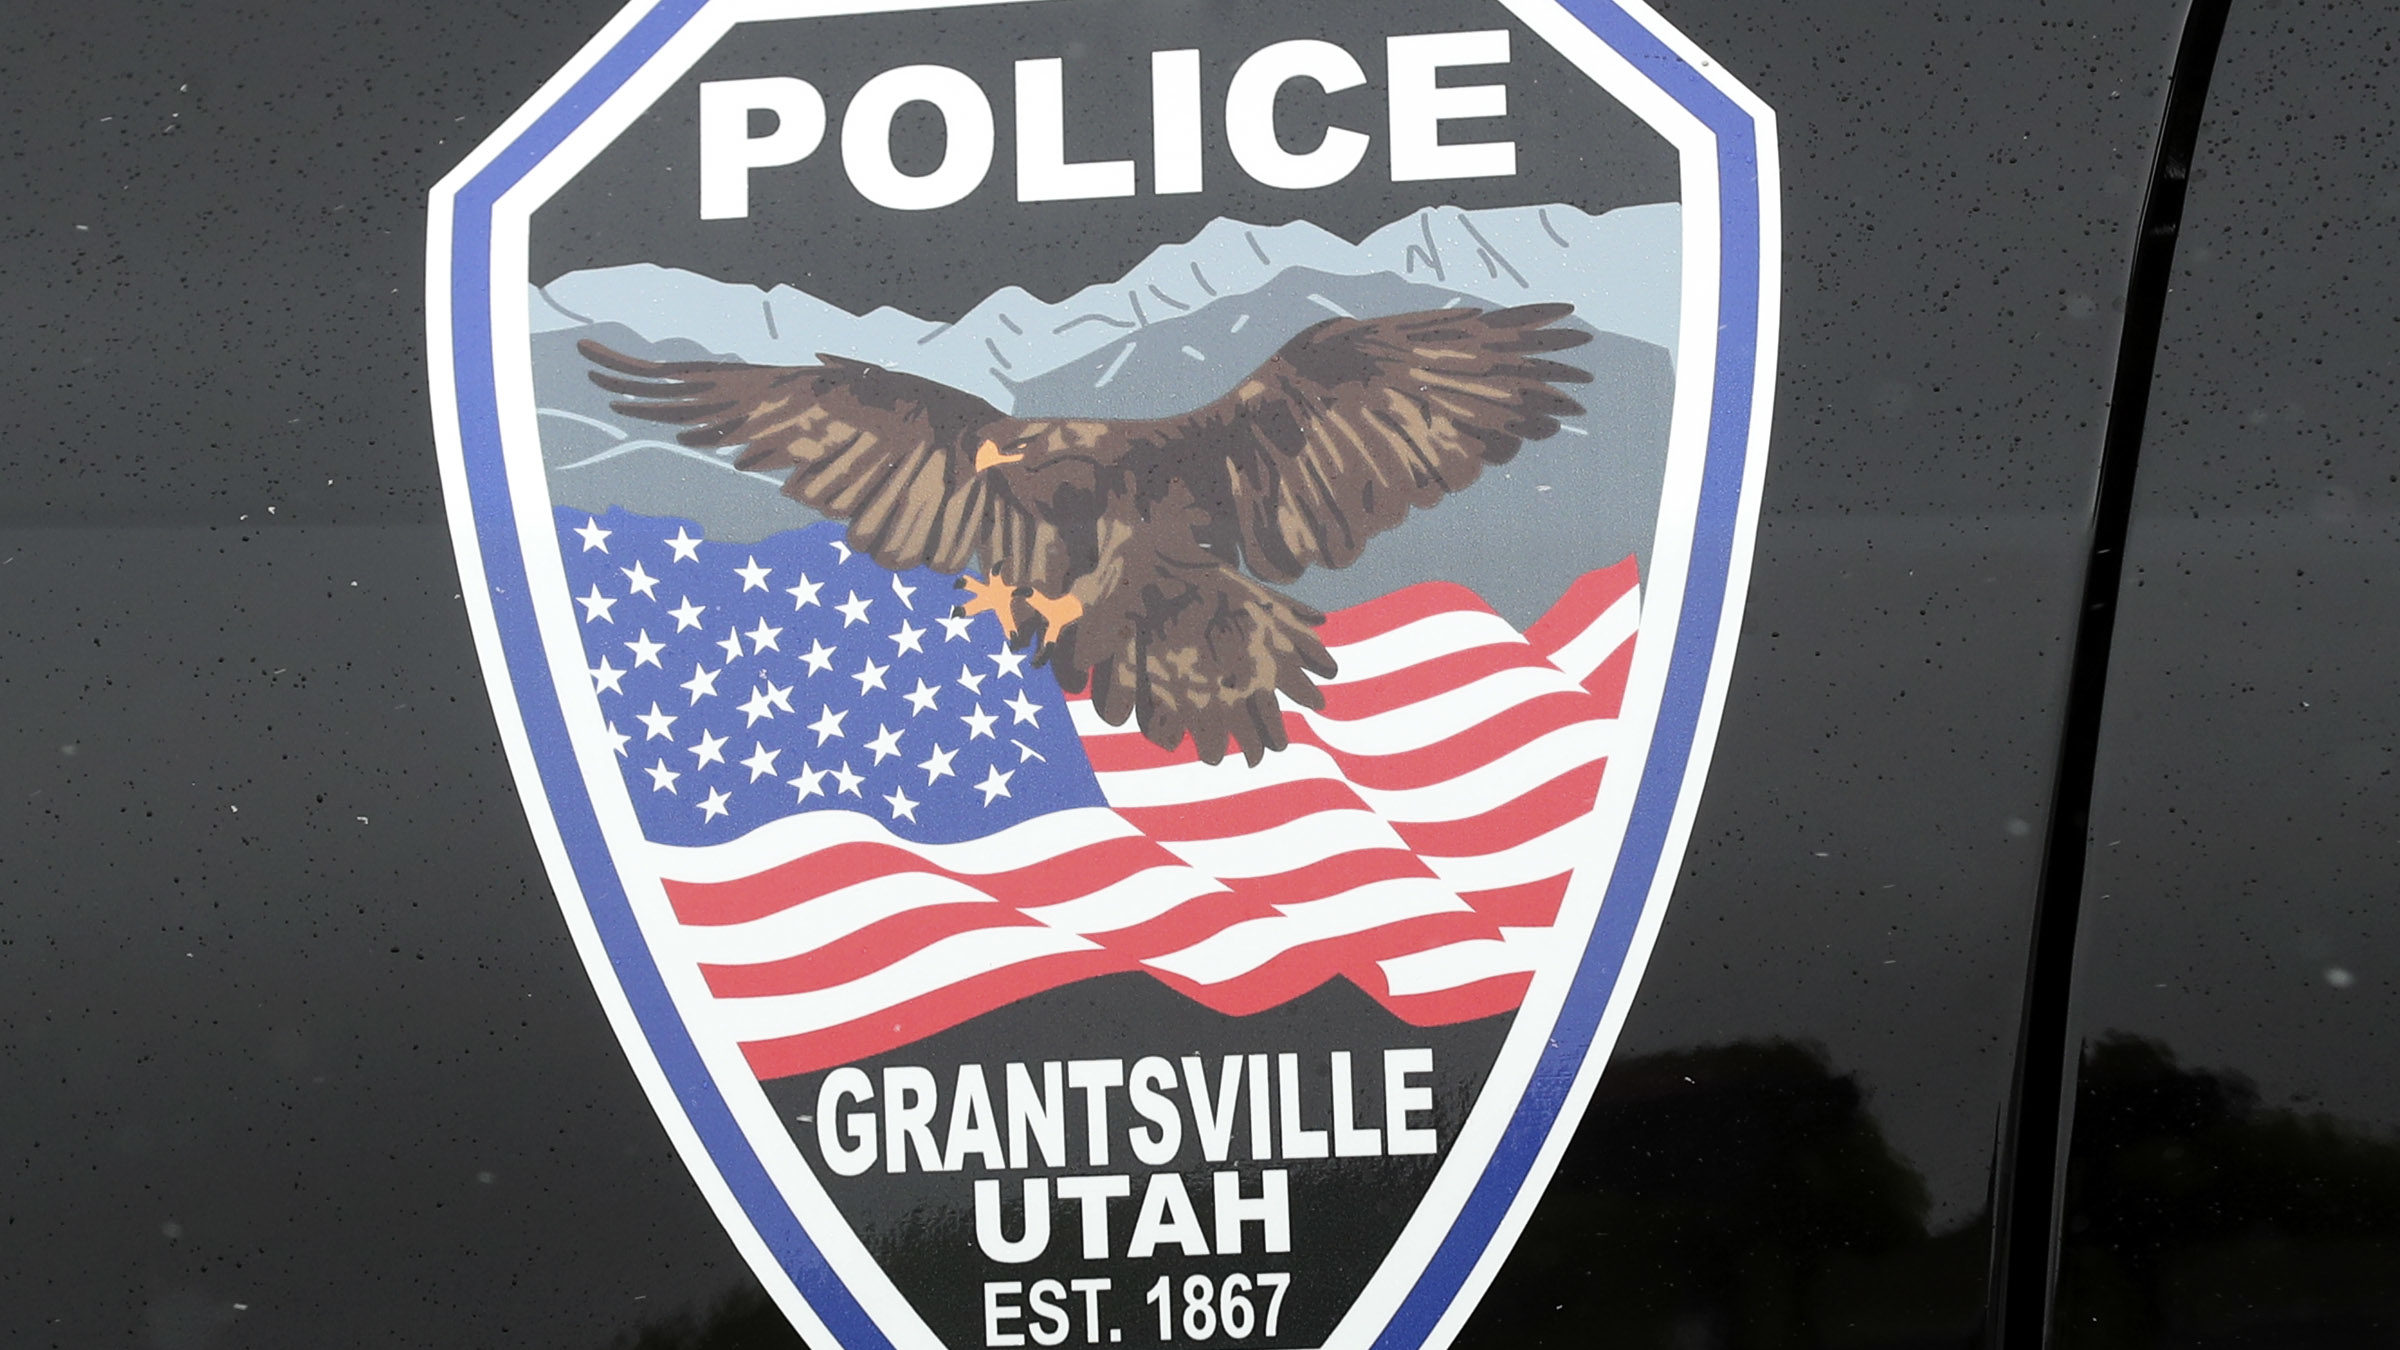 A Grantsville police vehicle is pictured in Grantsville on Monday, Dec. 28, 2020. Grantsville Polic...